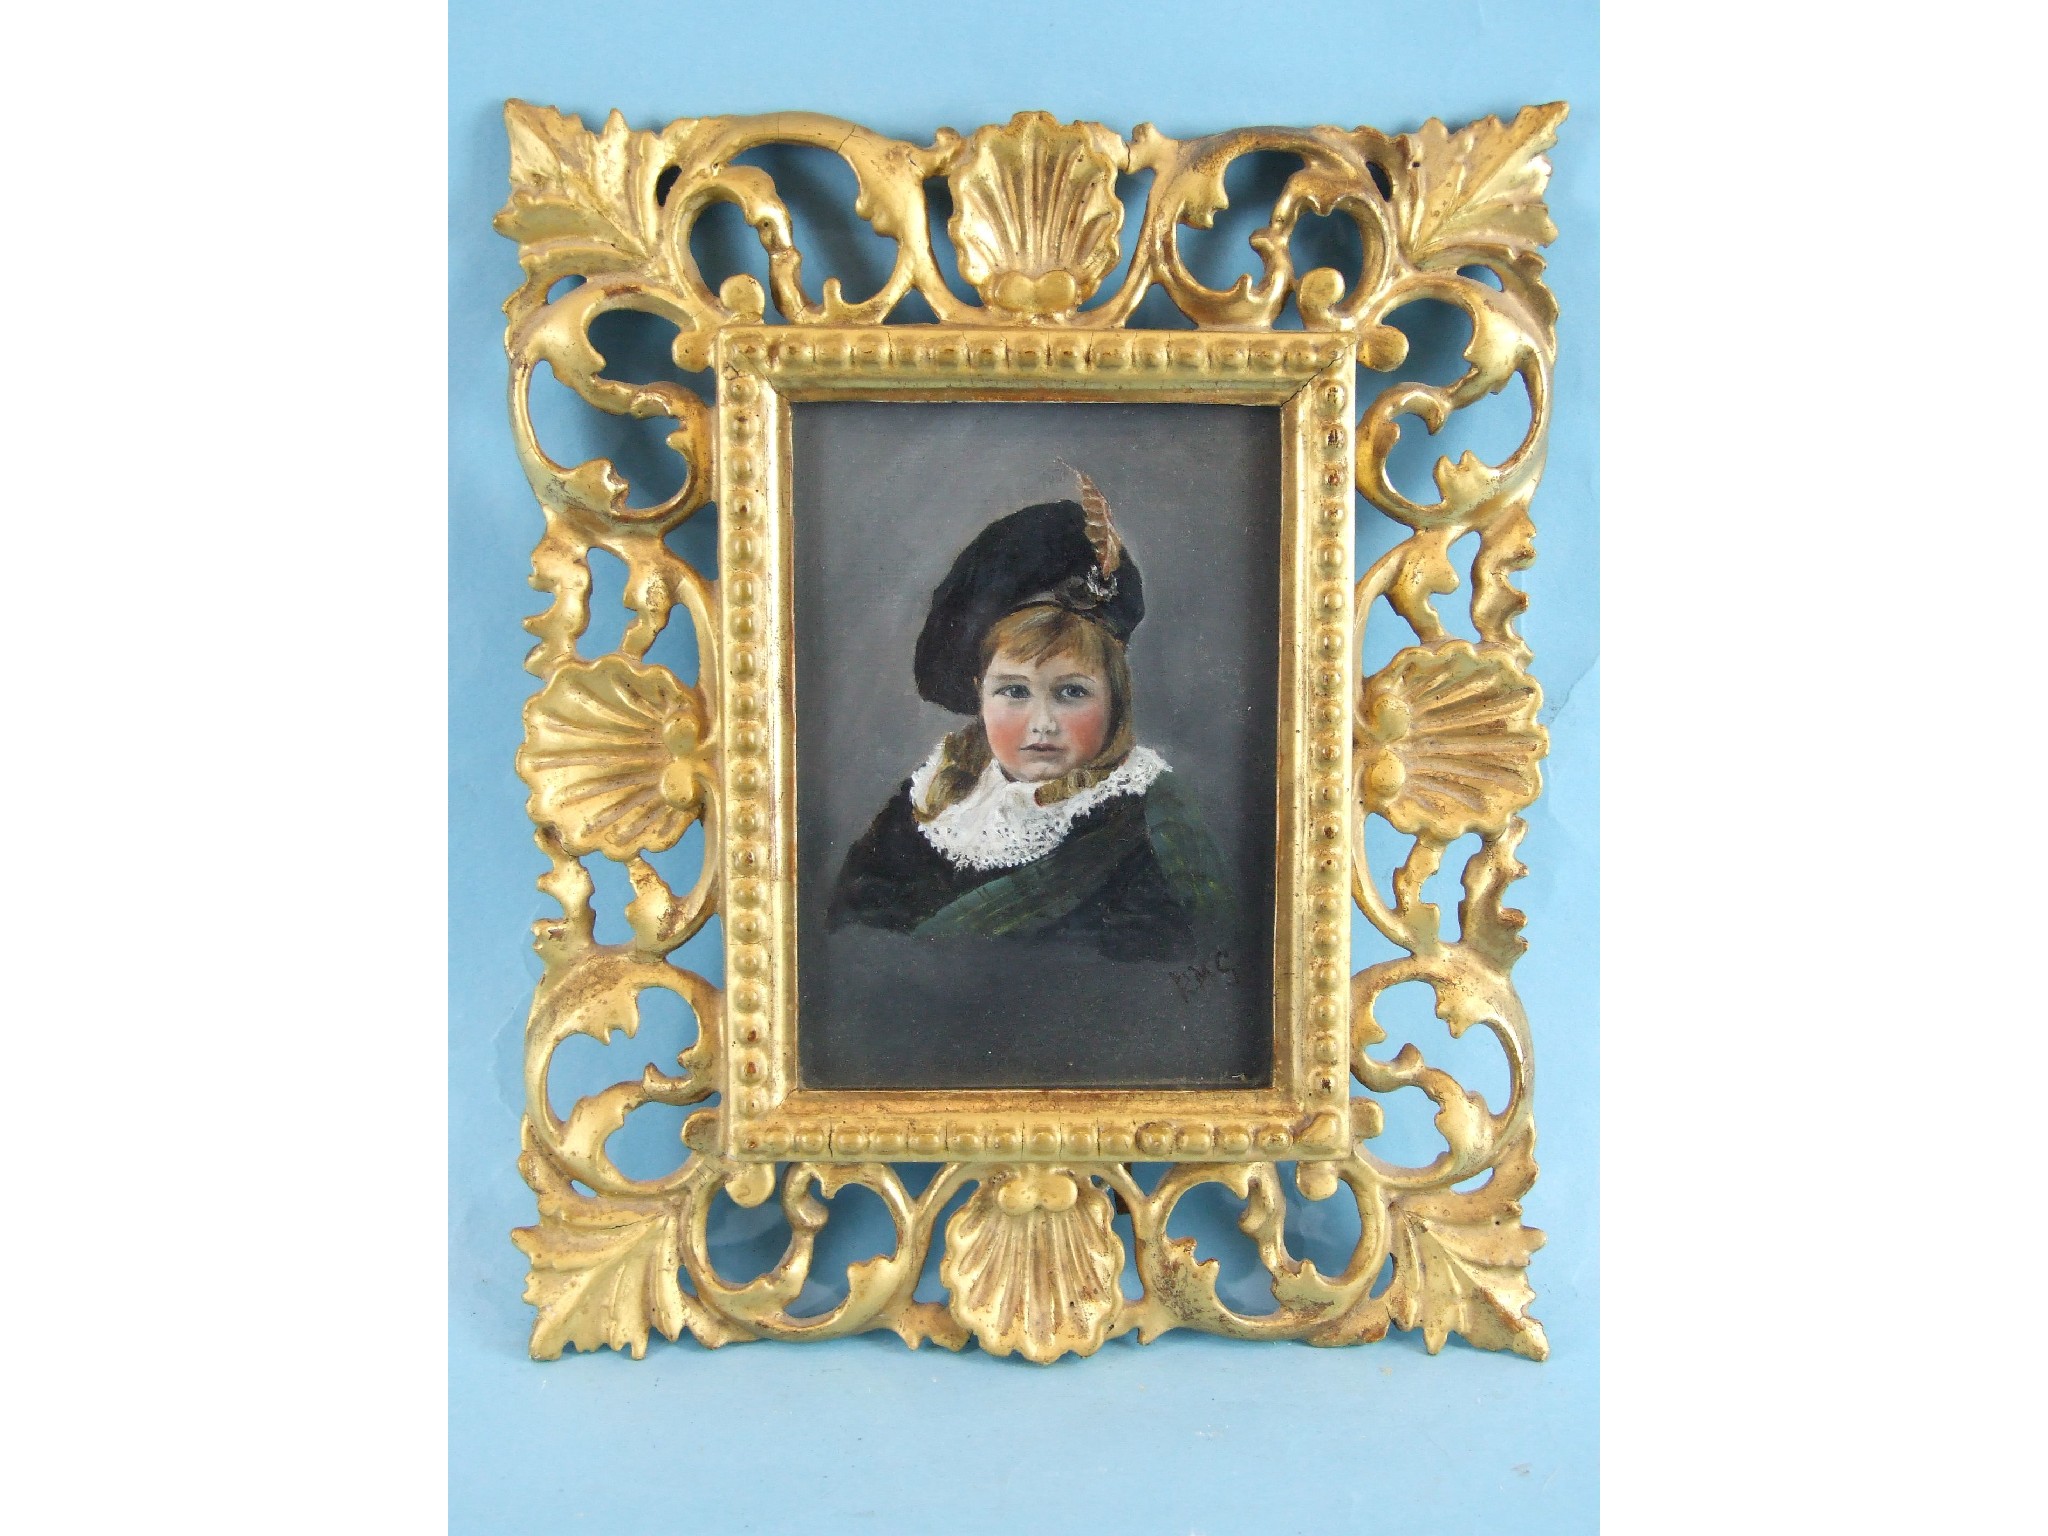 R. M. S. Early-20th century PORTRAIT OF A YOUNG GIRL WEARING HIGHLAND ATTIRE Oil on canvas, laid